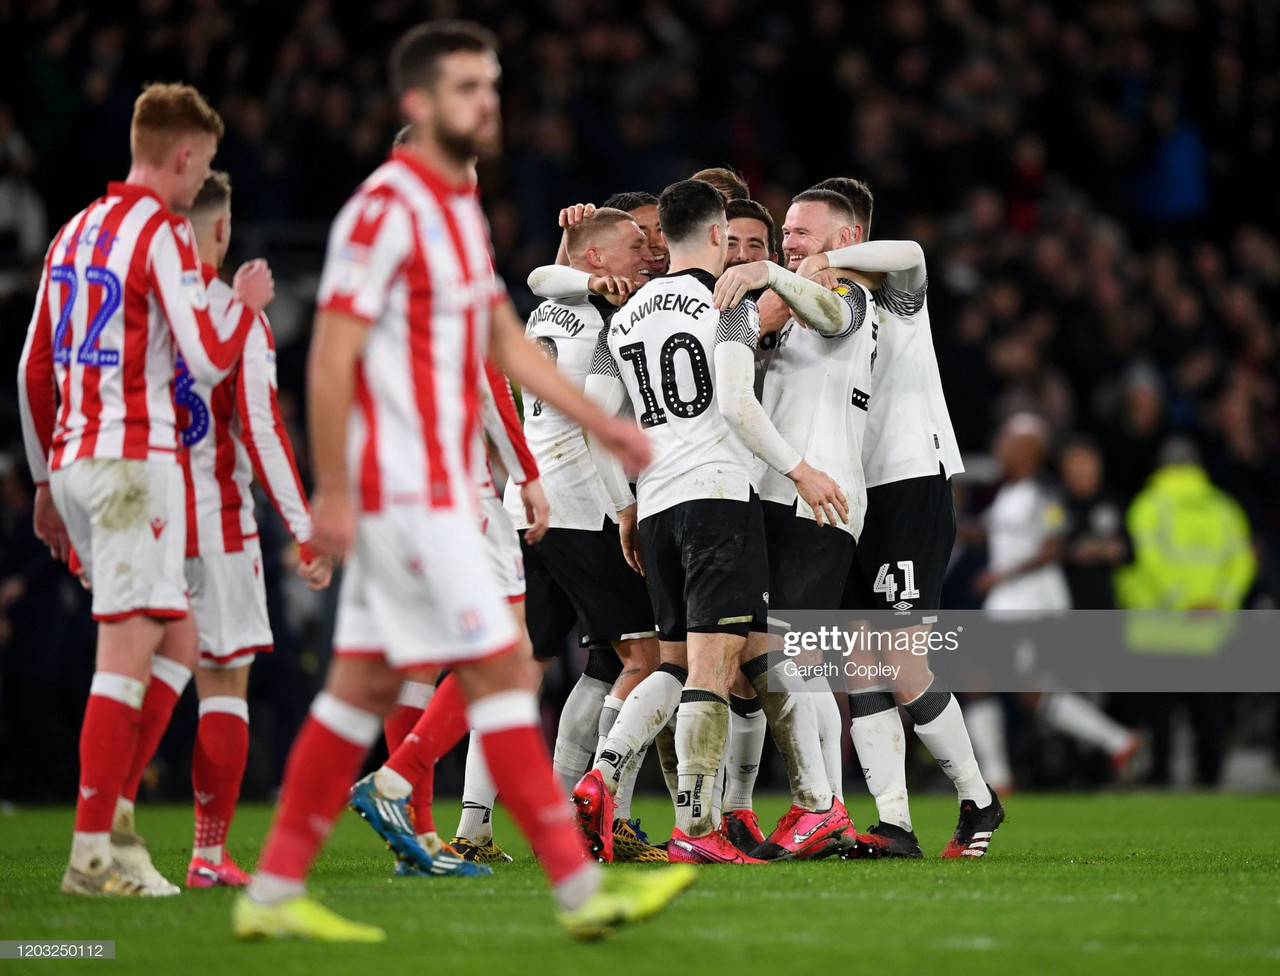 Derby County 4-0 Stoke City: Rampant Rams dominate Potters for biggest win of season